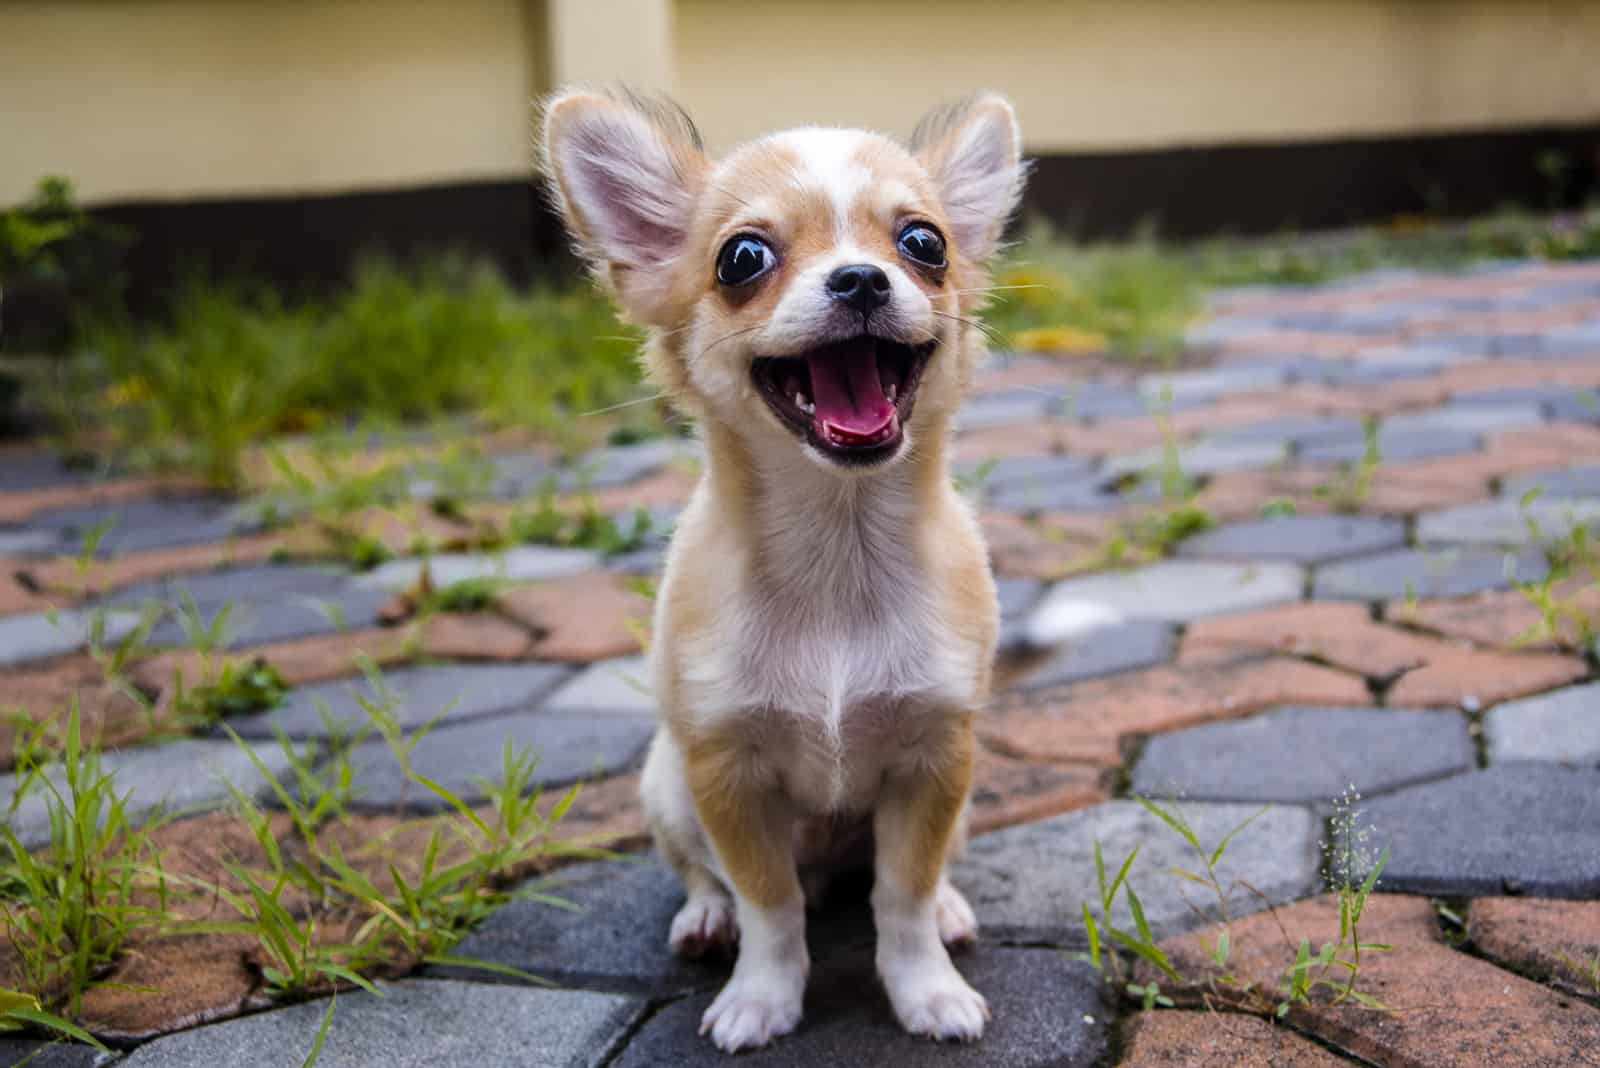 These 35 Dogs Will Turn Your Frown Upside Down